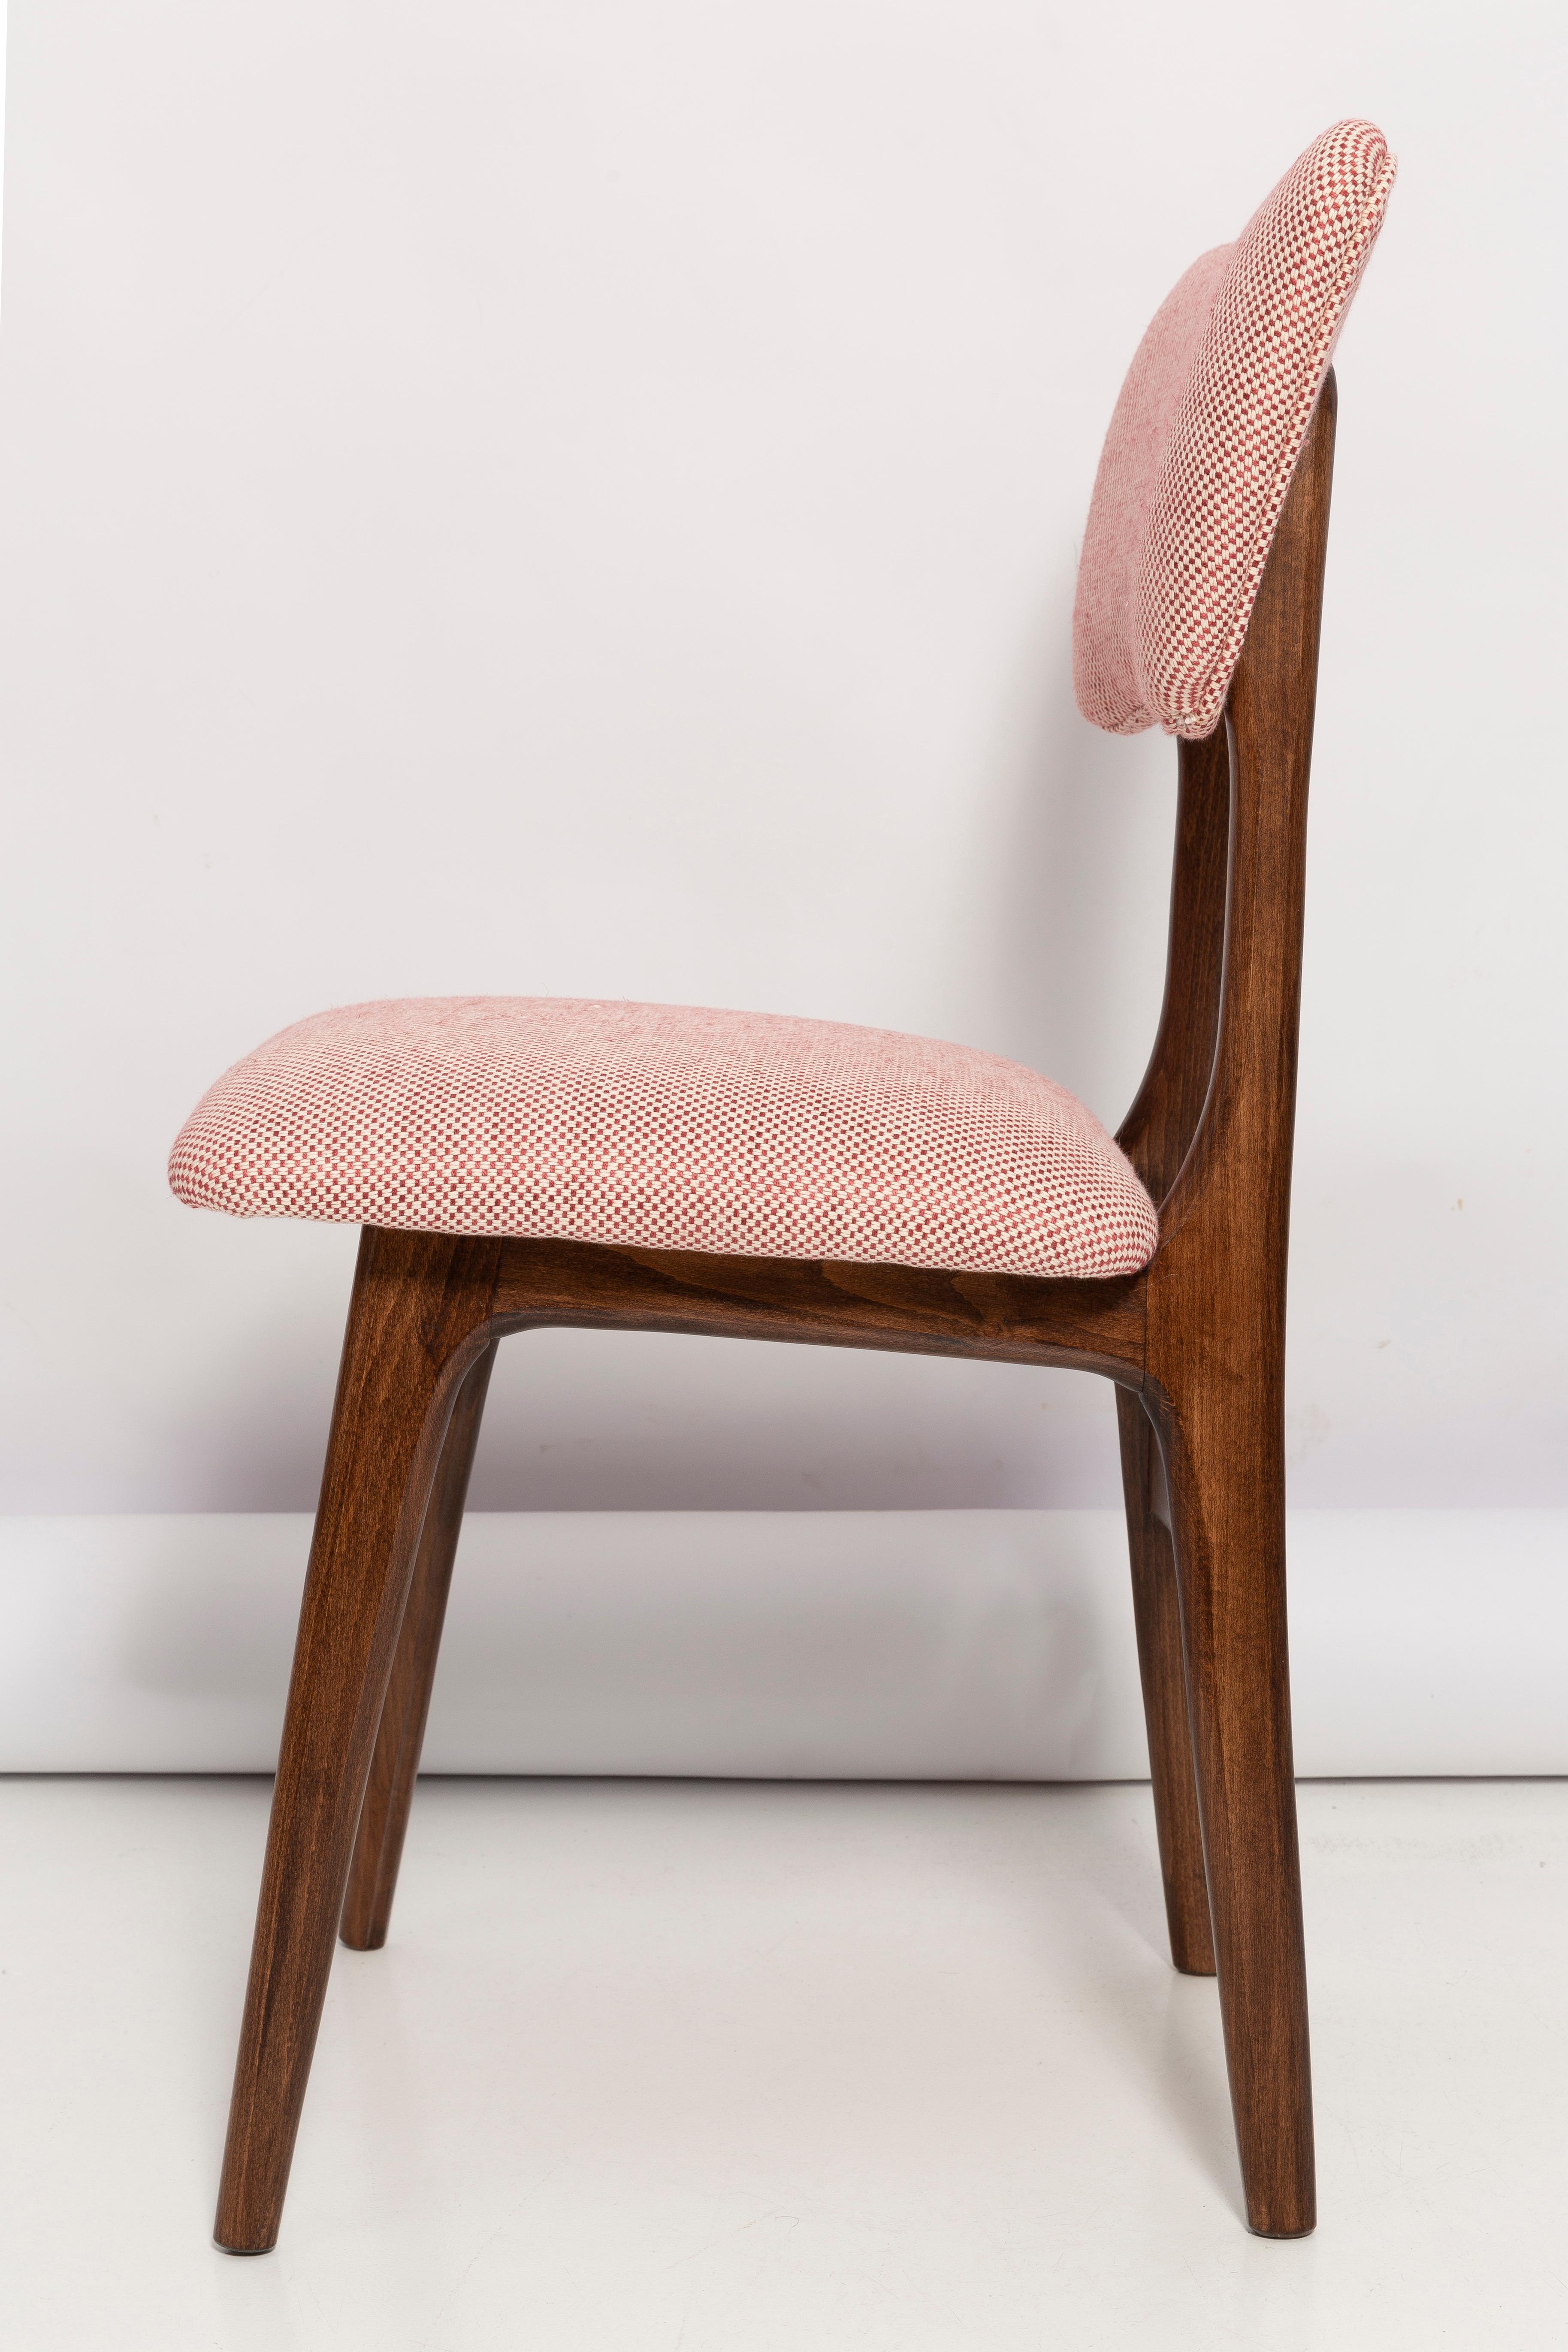 Set of Eight Mid Century Butterfly Dining Chairs, Peony Cotton, Poland, 1960s For Sale 4